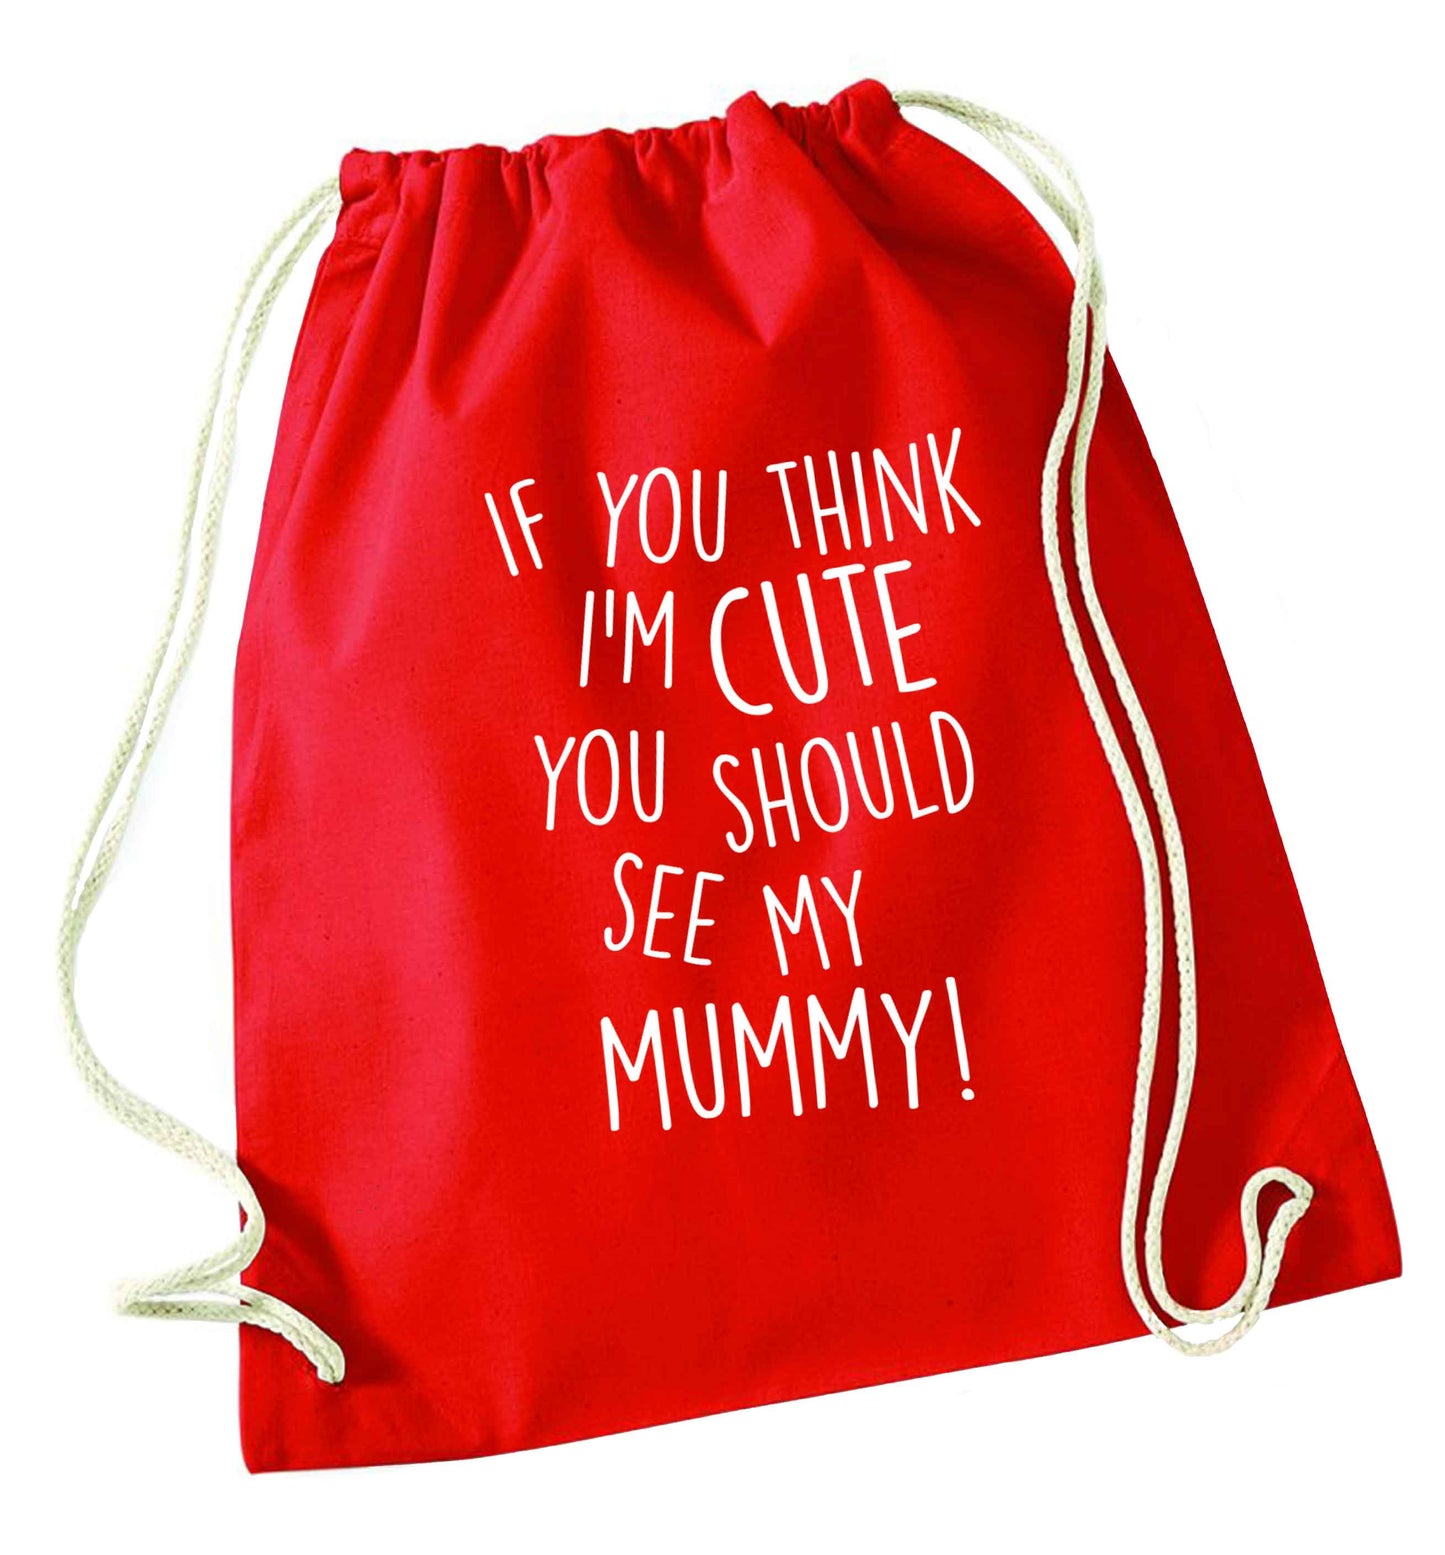 If you think I'm cute you should see my mummy red drawstring bag 